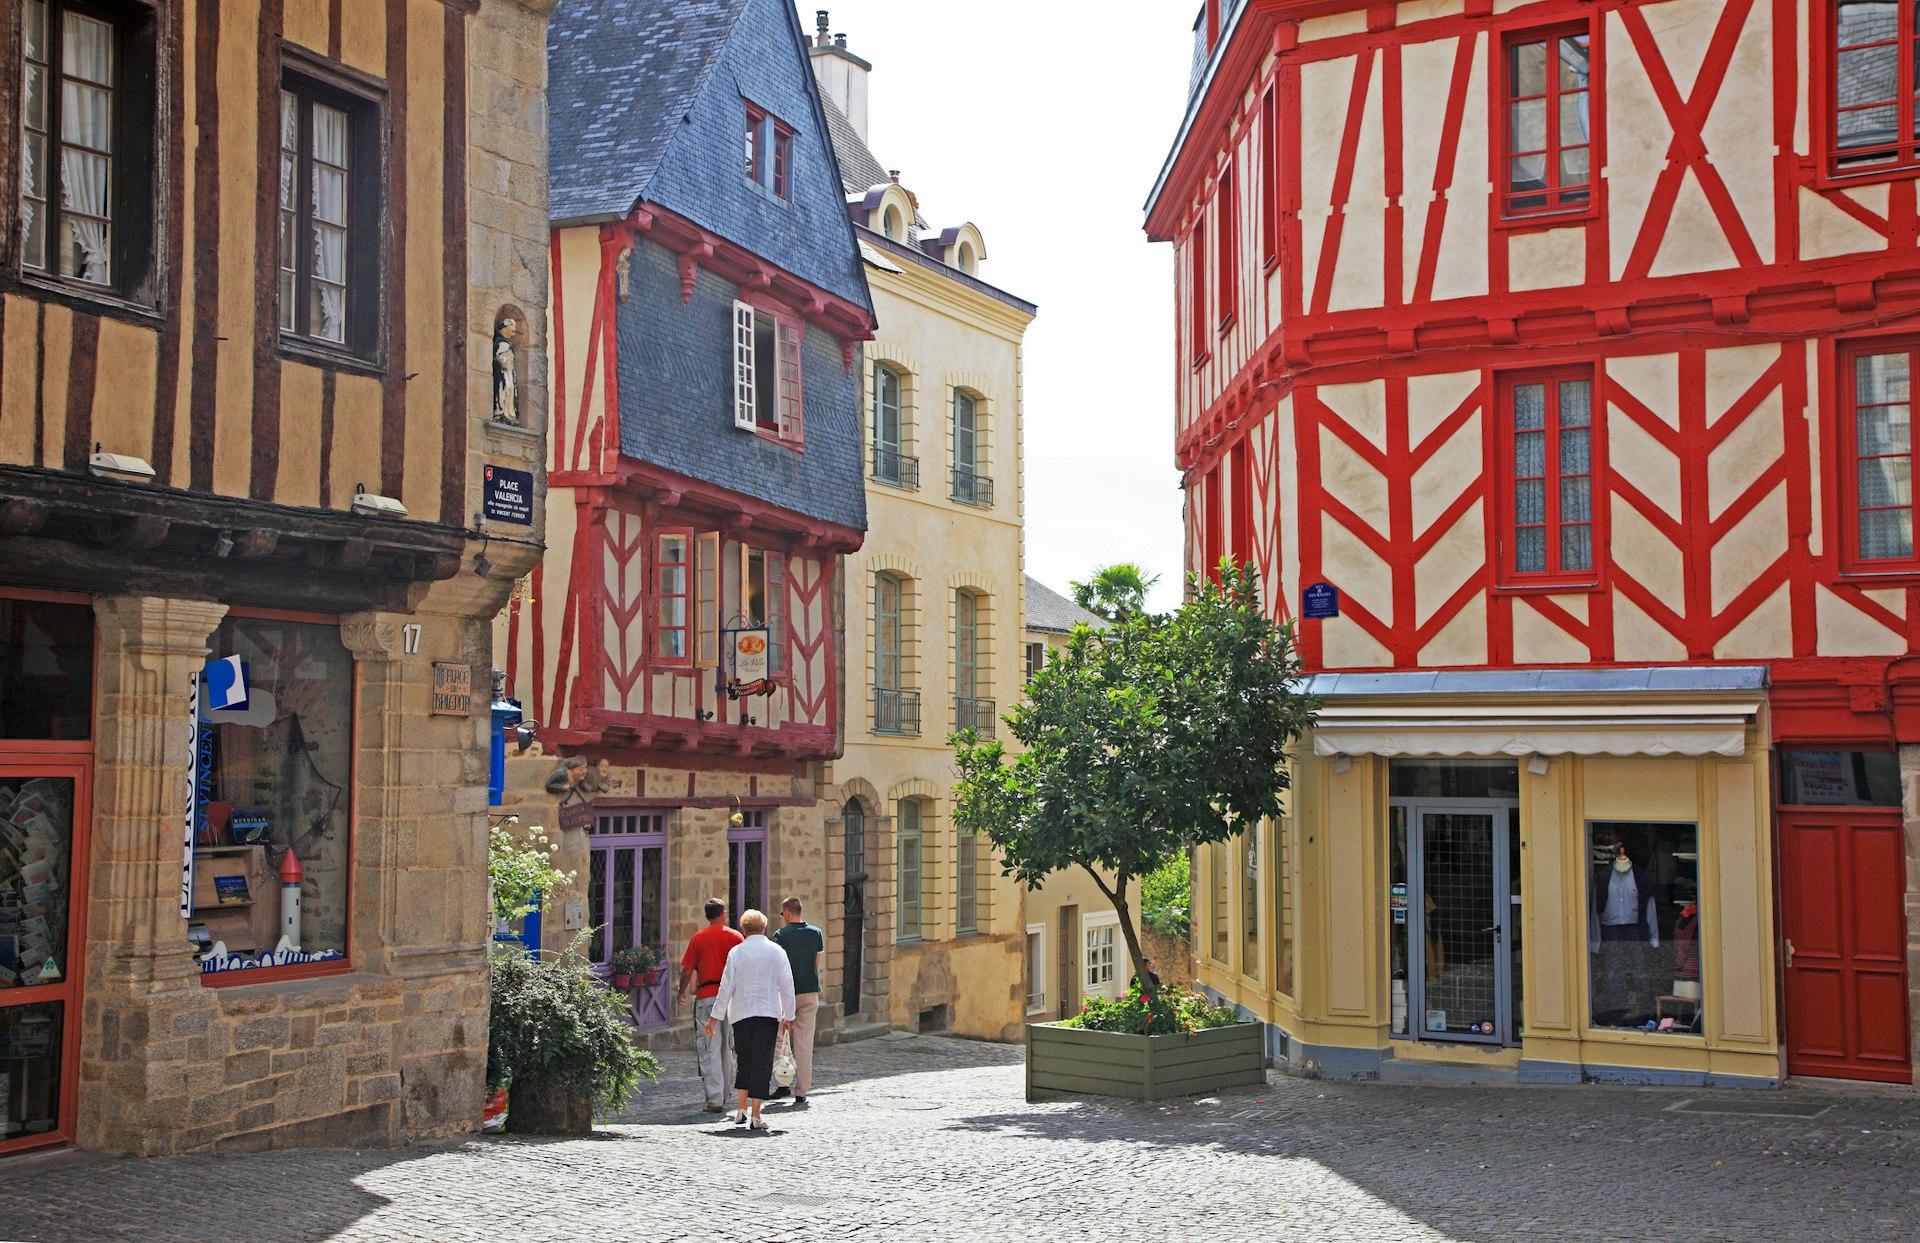 Tourists mill about the mediveal town center of Vannes with pretty wooden-timber houses and bright sunshine